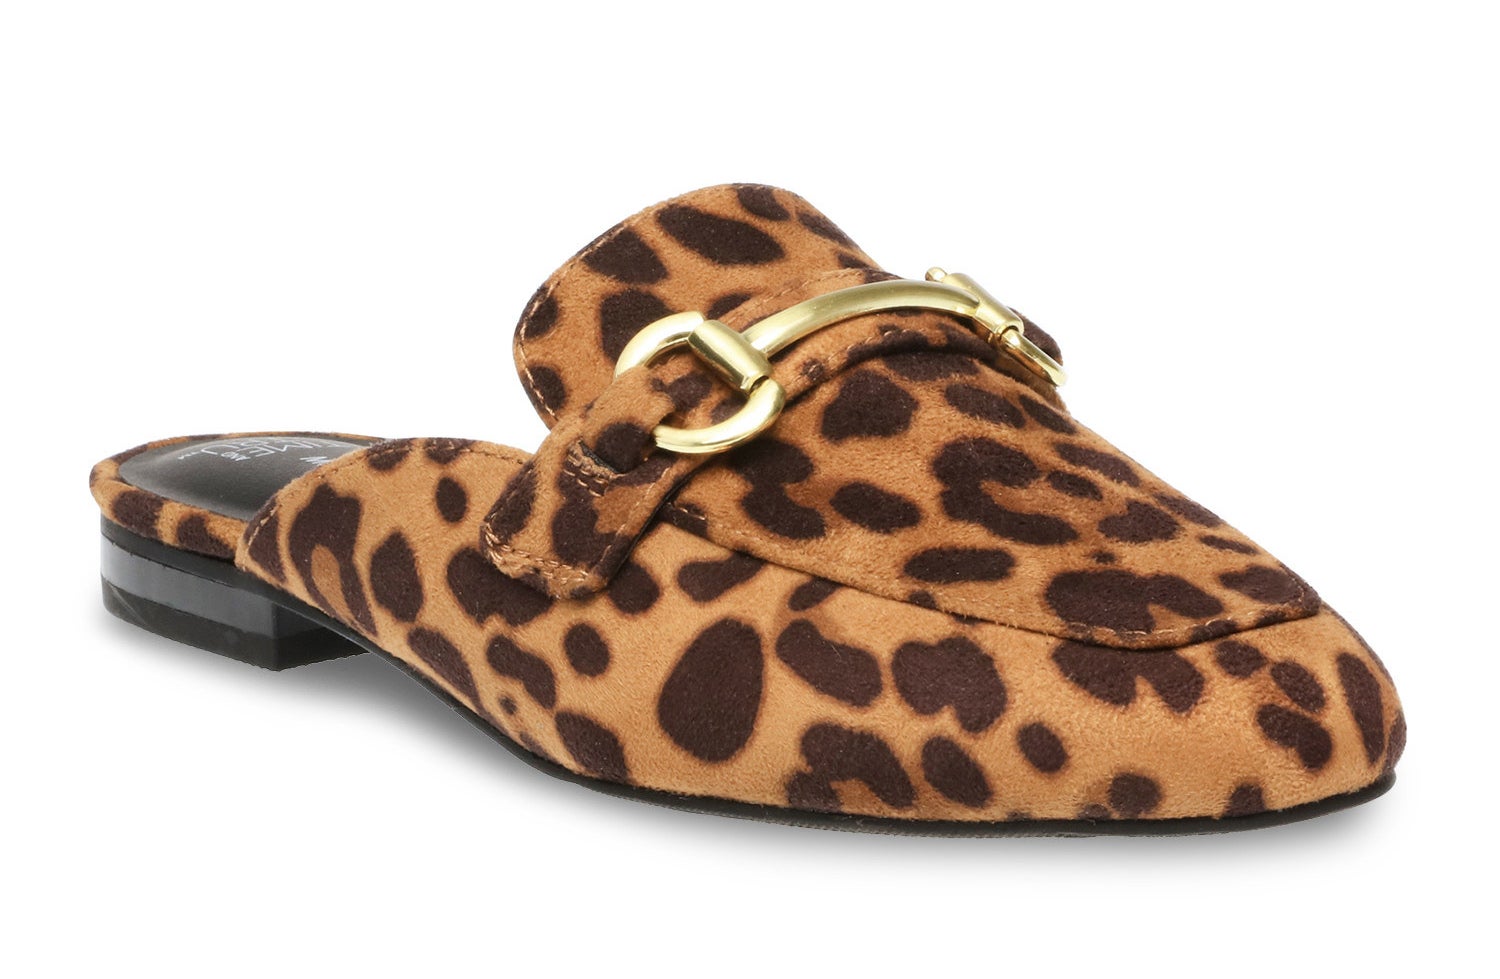 A leopard print slip in with a golden metal buckle